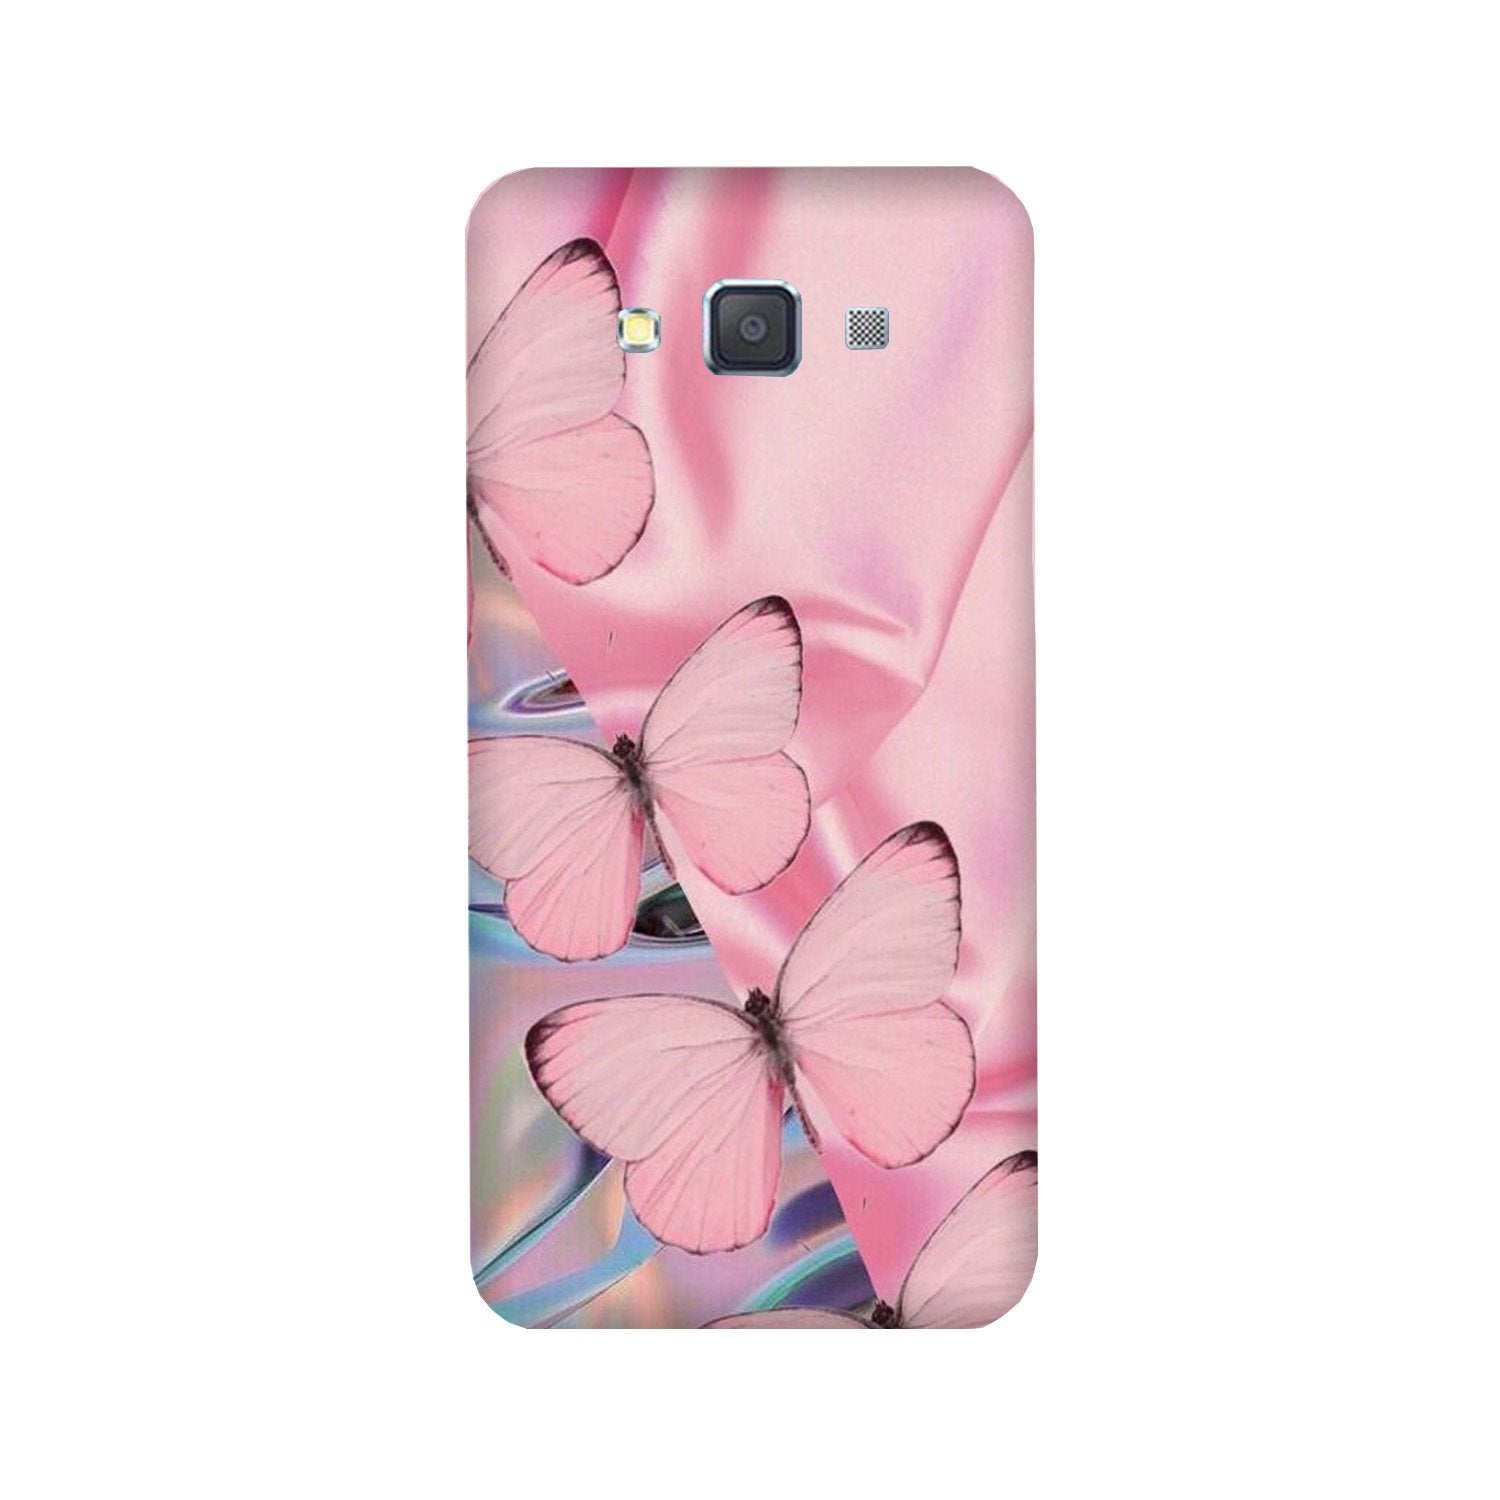 Butterflies Case for Galaxy Grand Prime